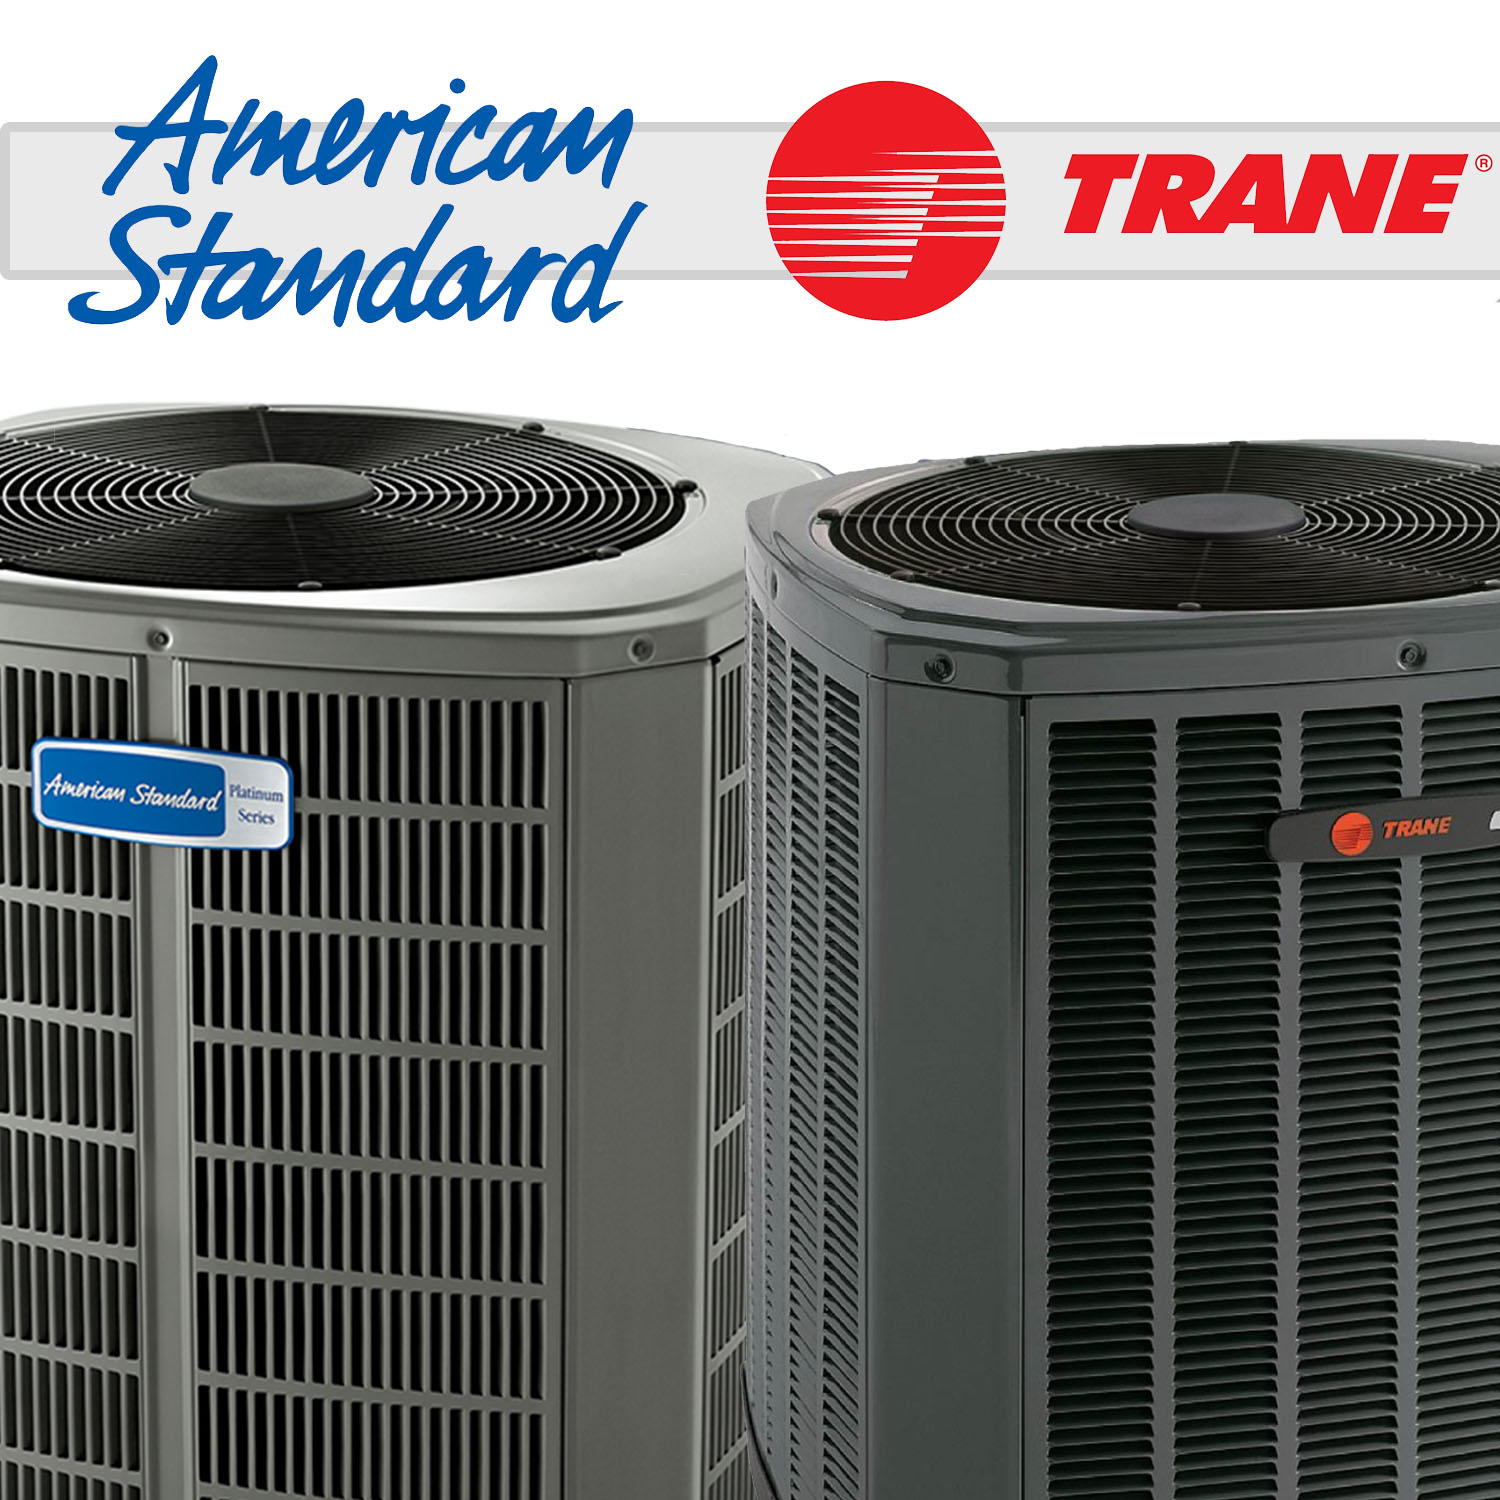 American Standard Vs Trane Systems Differences Fact Hvac